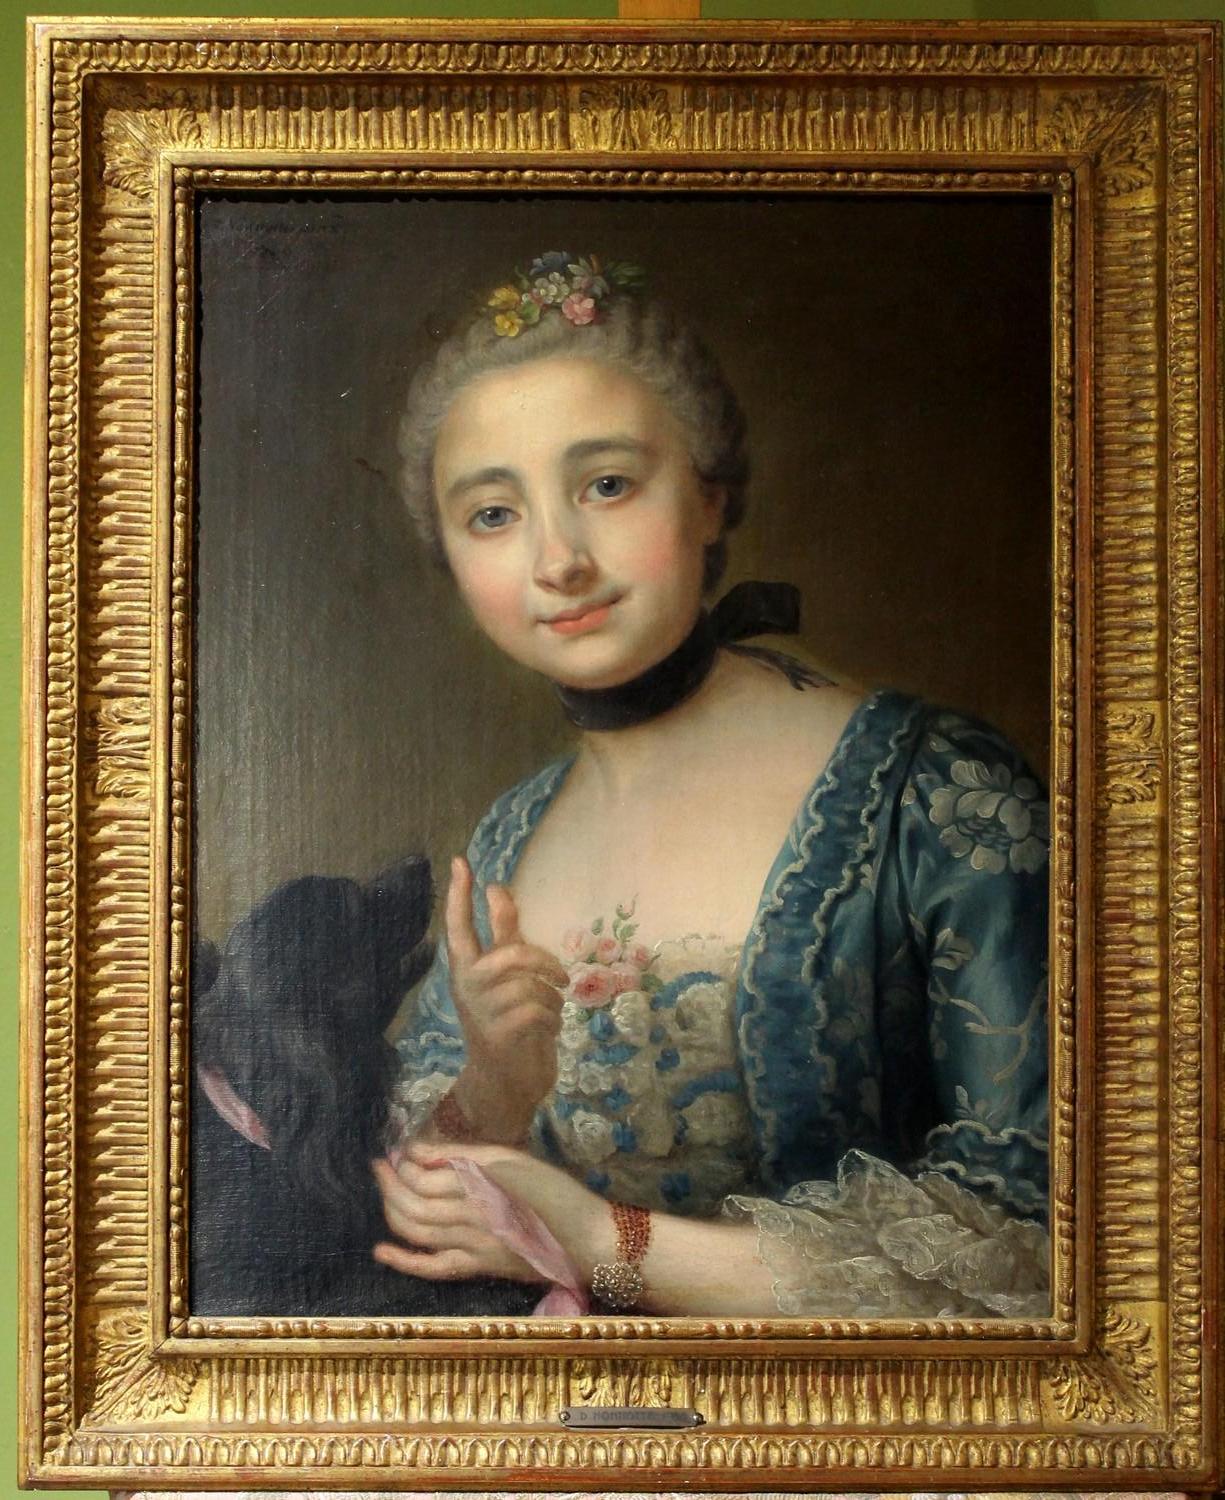 Wonderful mid- 18th Century French Old Master oil on canvas painting portrait of a lady with her dog by Donatien Nonnotte signed and dated 1760.
D. Nonotte was the pupil and student emeritus of François Lemoyne and he taught François-Hubert